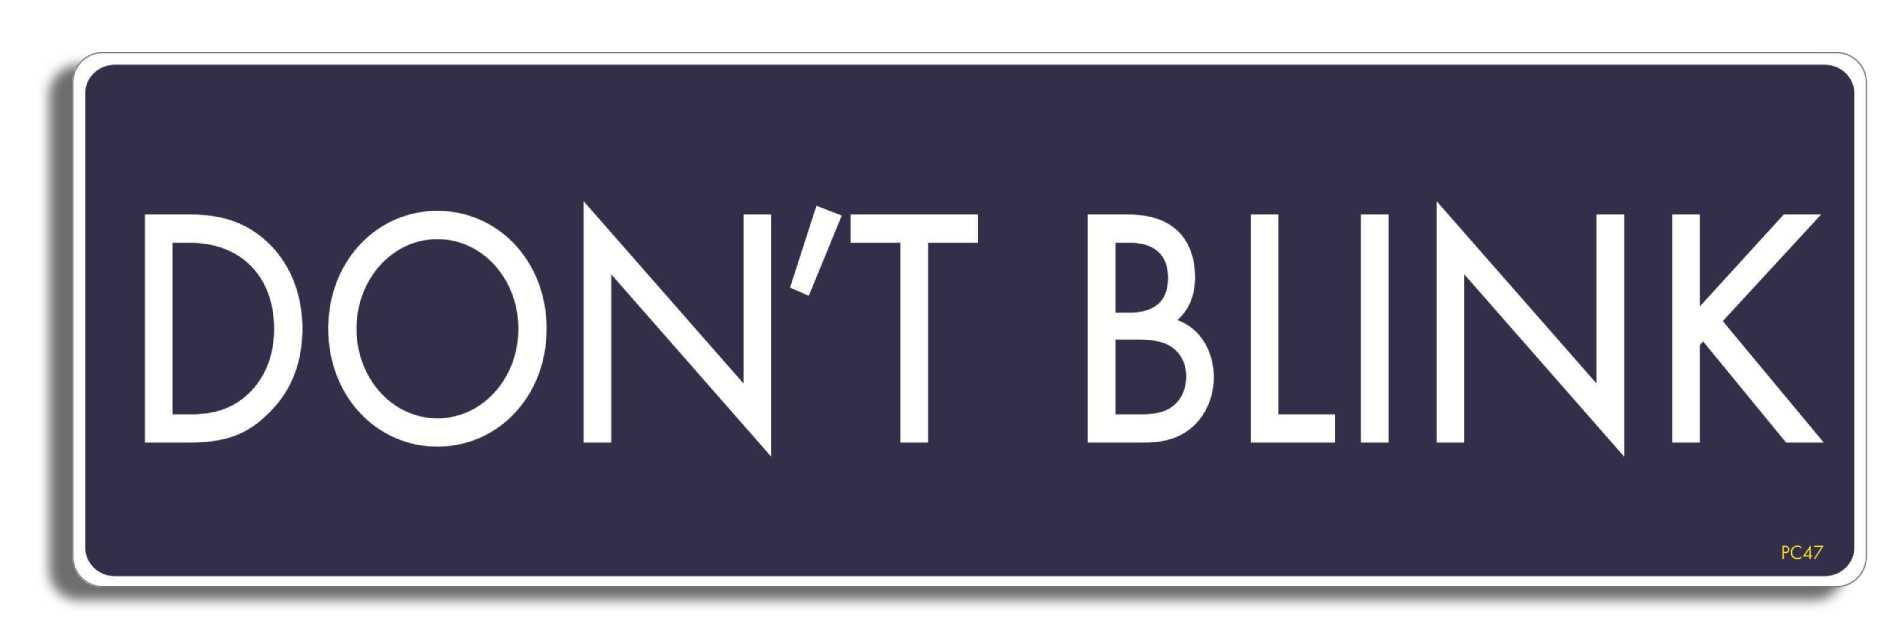 Don't Blink (Dr. Who) 3" x 10" Bumper Sticker--Car Magnet- -  Decal Bumper Sticker-dr who Bumper Sticker Car Magnet Don't Blink (Dr. Who)-  Decal for carsdr who, tardis, weeping angels